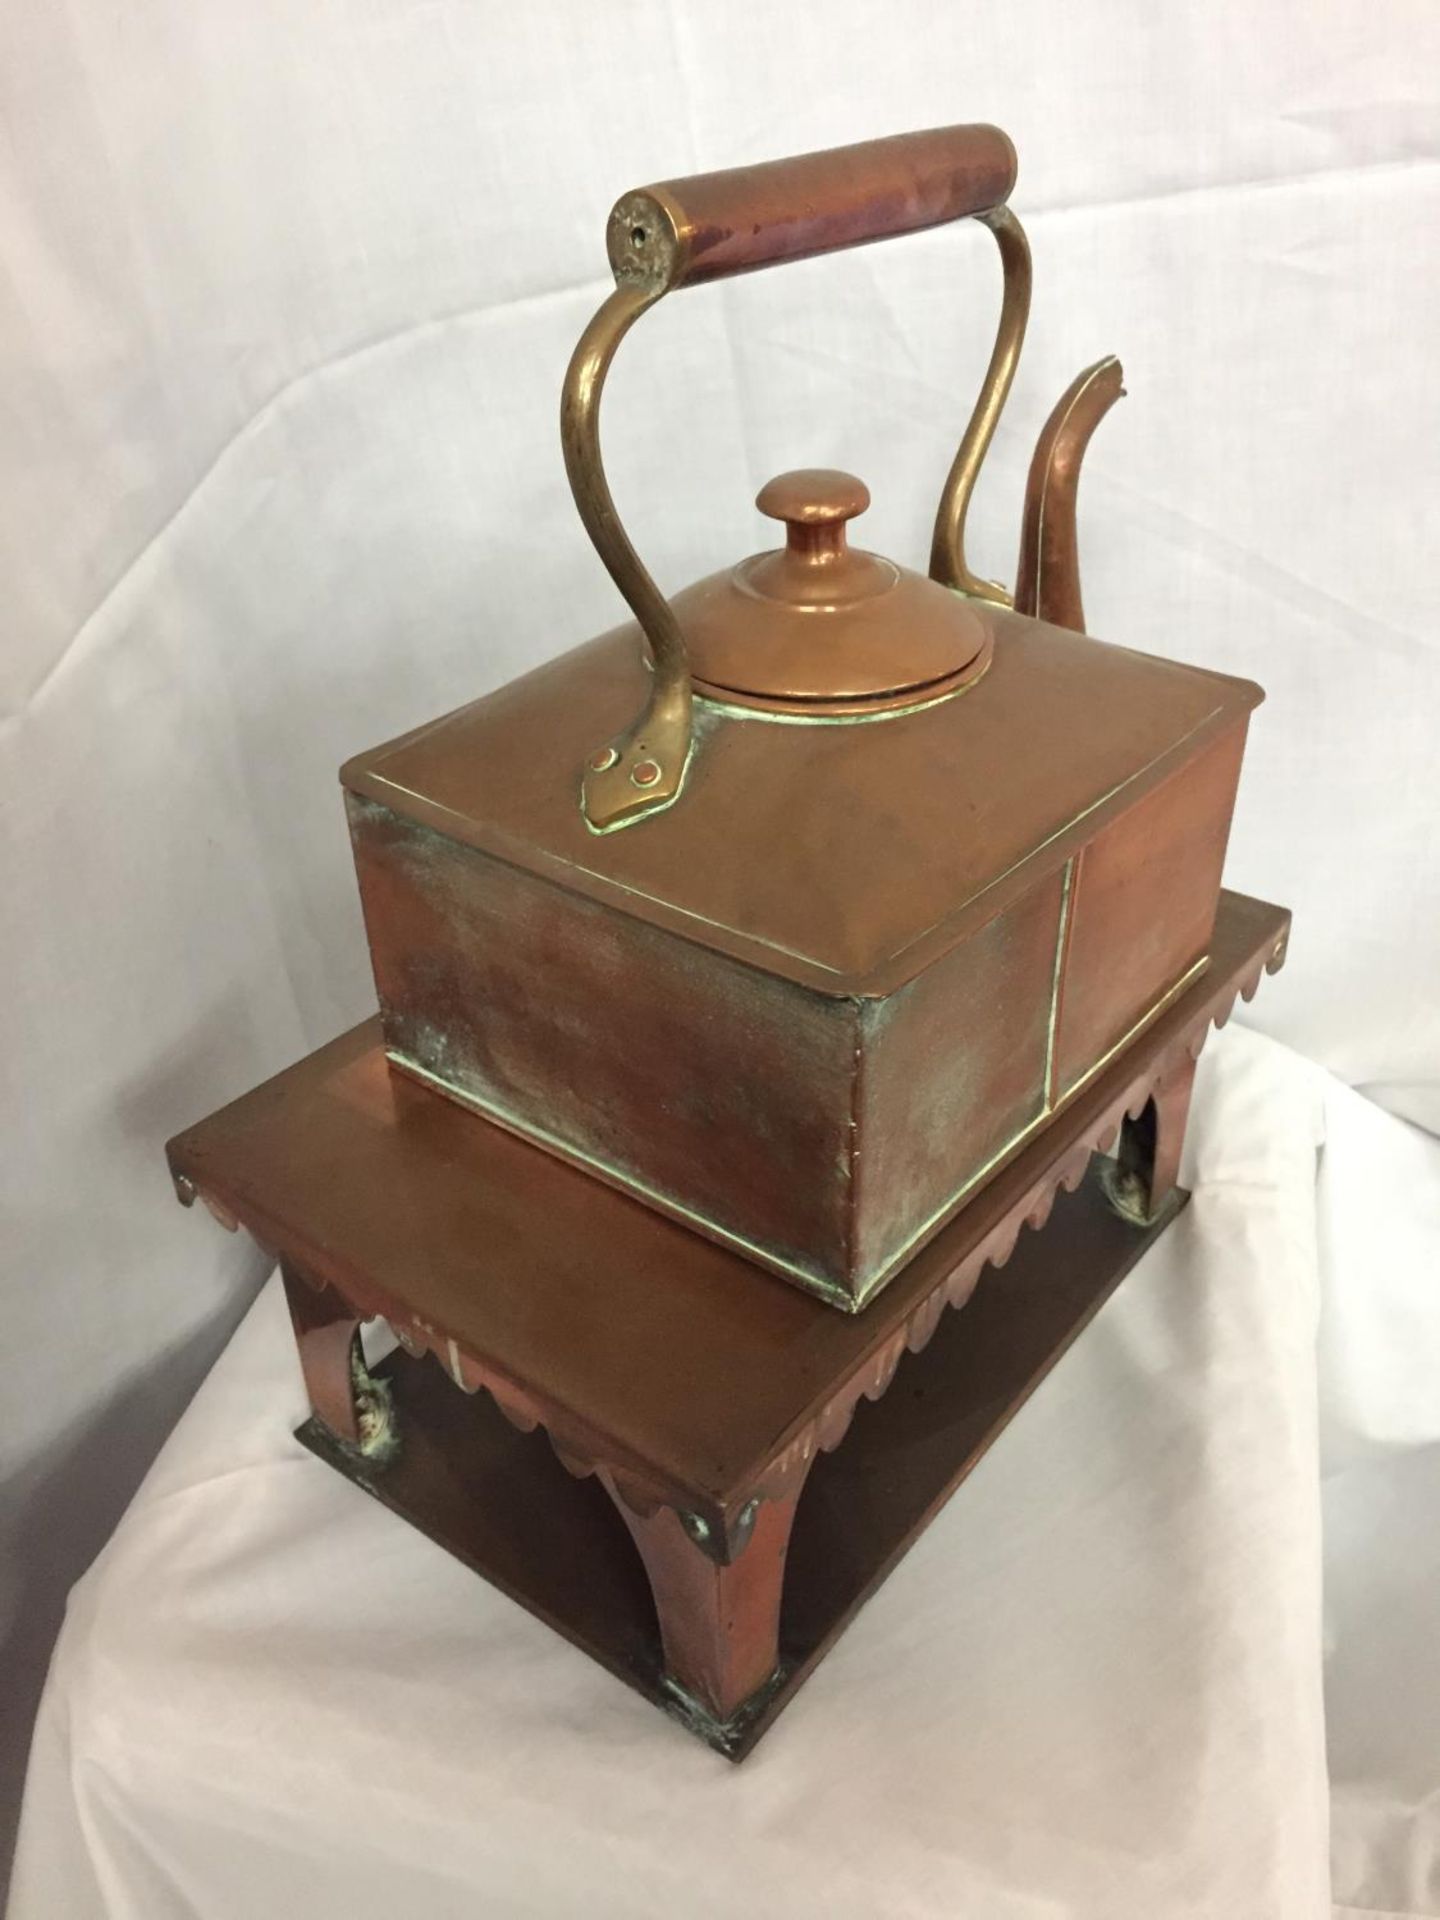 A SQUARE COPPER KETTLE TOGETHER WITH SQUARE STAND OVERALL HEIGHT 45CM, WIDTH 36CM - Image 3 of 4